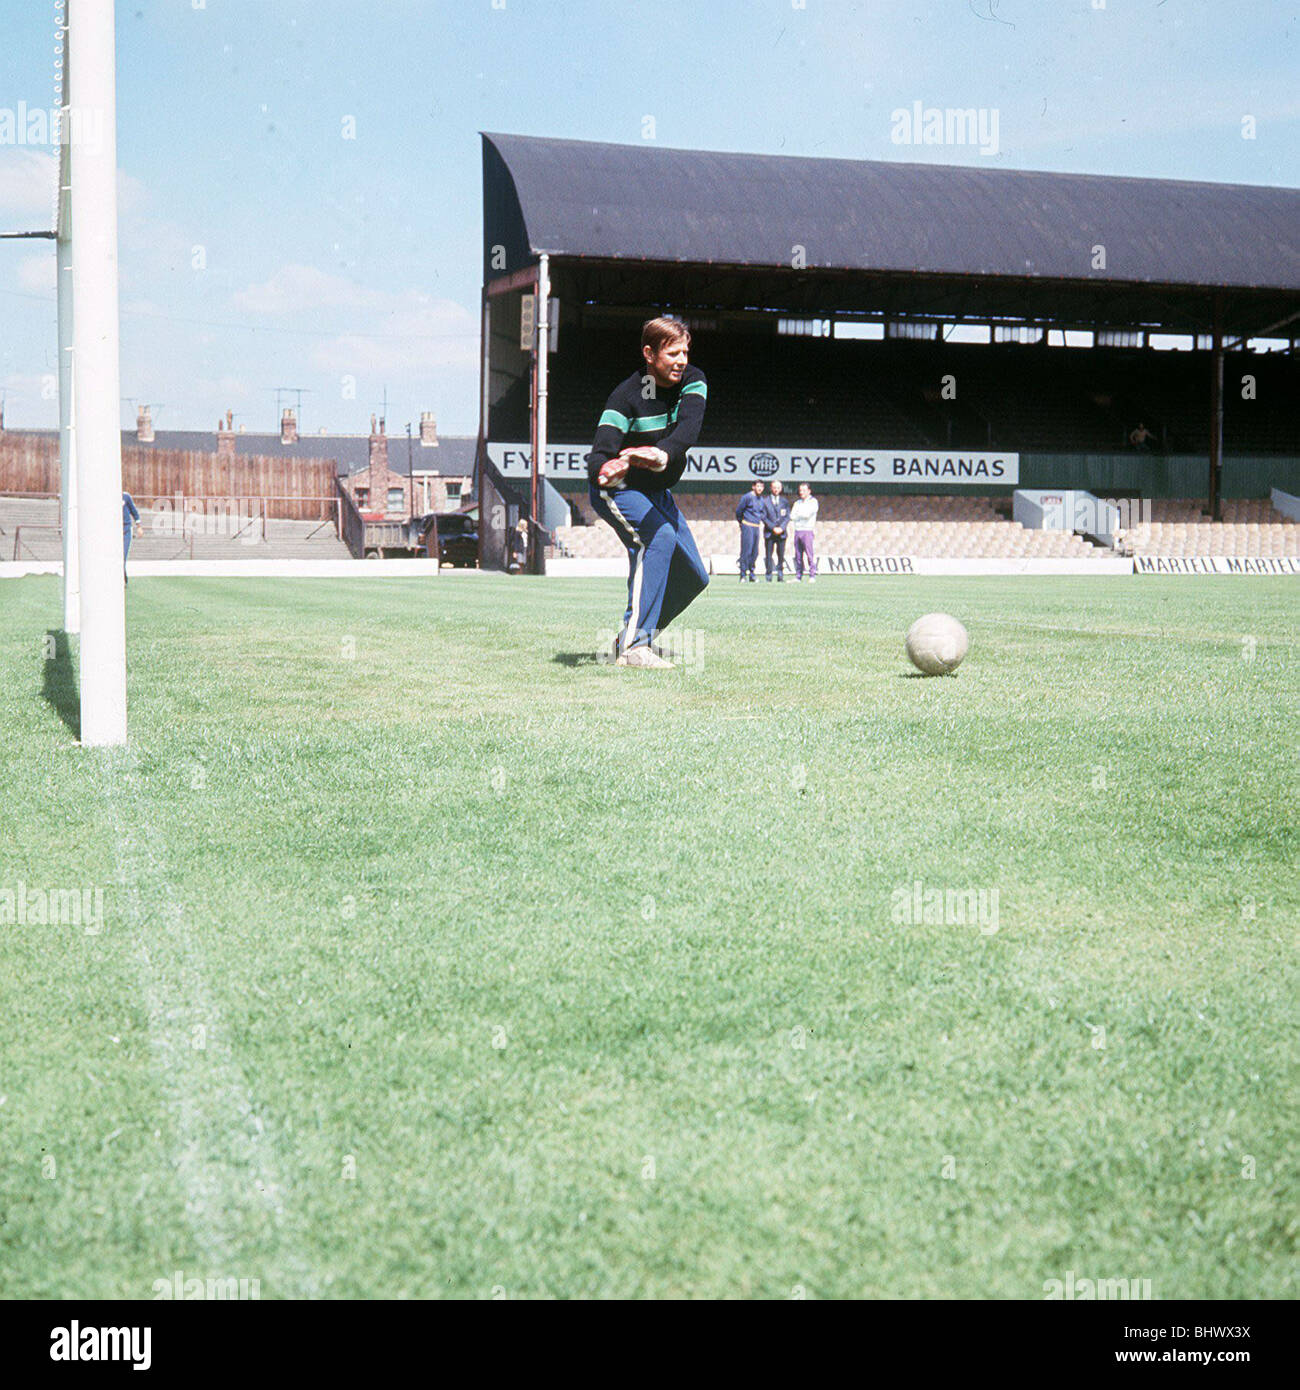 Lev Yashin, Russian goalkeeper, training at Ayrsome Park, home of Middlesbrough Football Club, ahead of match v North Korea July 1966. Ayresome Park played host to three games in group four which was made up of USSR, North Korea, Chile and Italy. At Ayresome Park, in the opening game of the group, USSR beat North Korea 3-0 in front of 22,568 fans. Two goals in a minute, with half an hour gone, were enough to kill off the plucky Koreans. USSR added a third in the dying minutes. *** Local Caption *** Stock Photo